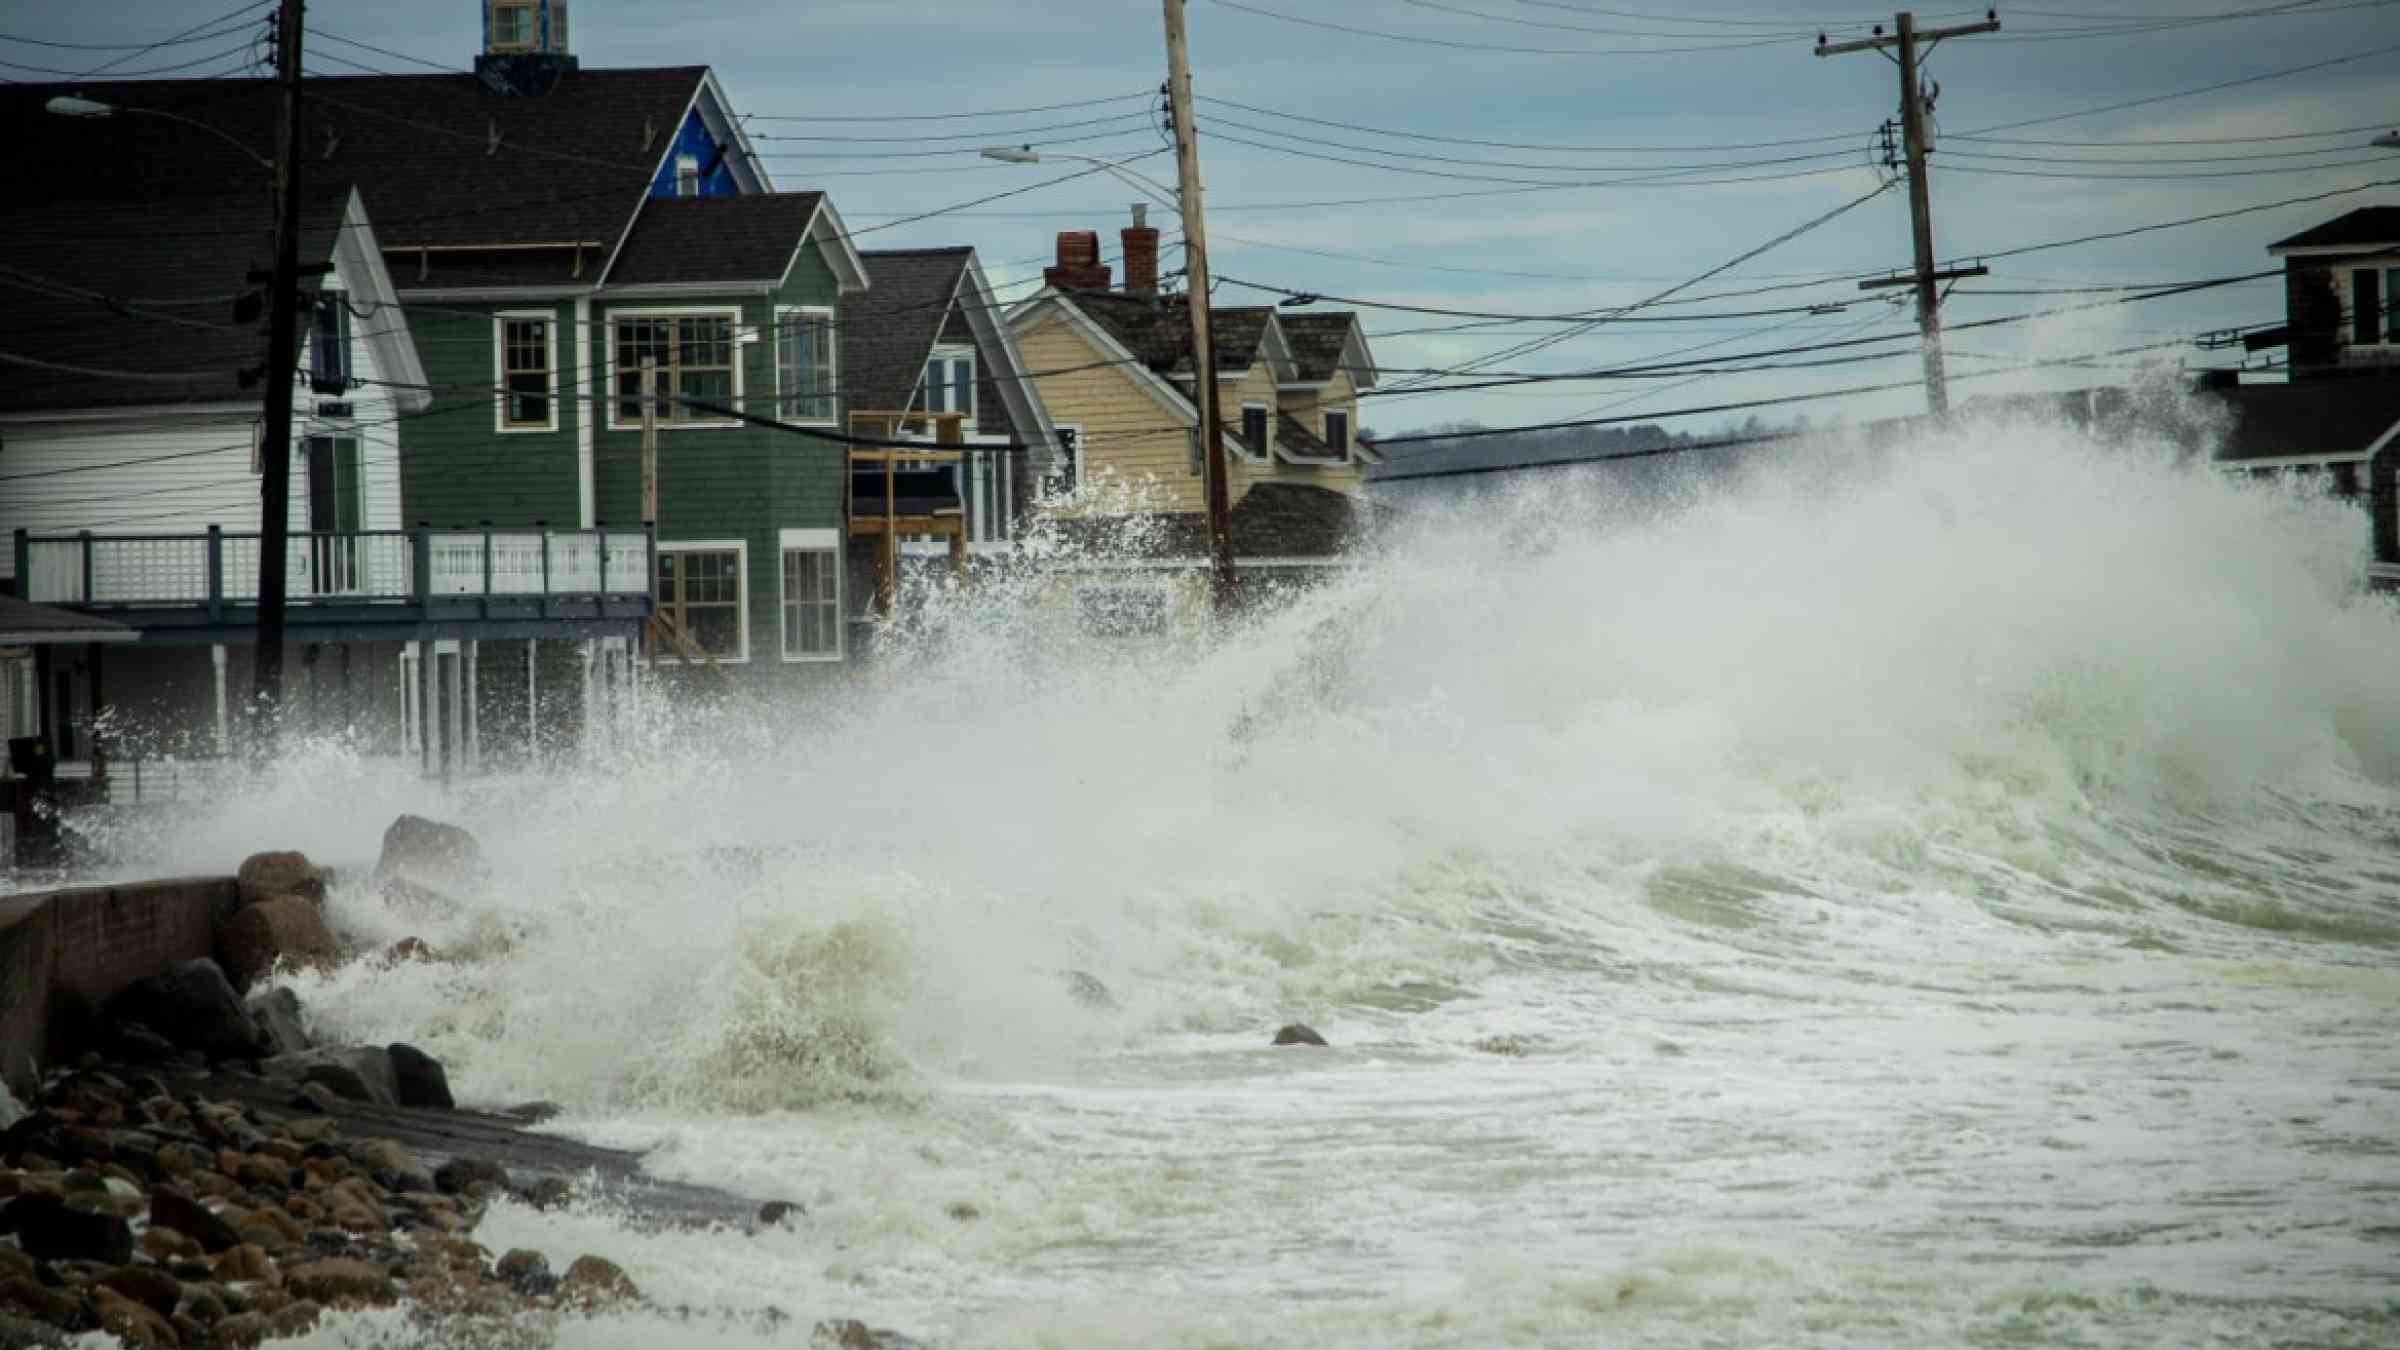 A storm ocean wave crashes over the road and floods coastal houses.